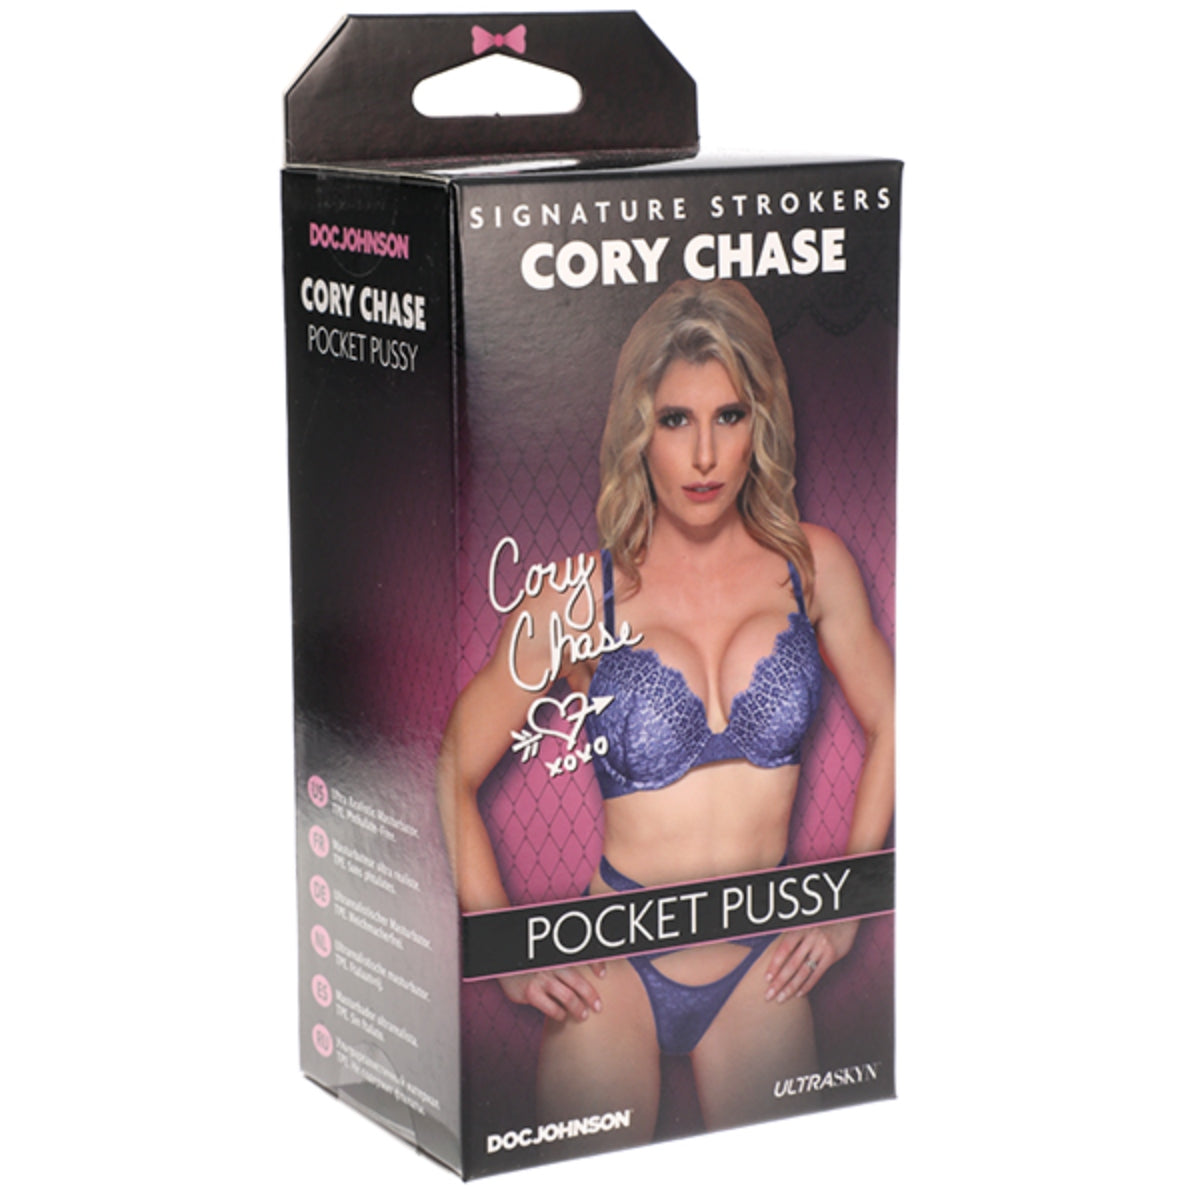 Signature Strokers Cory Chase Ultraskyn Pocket Pussy